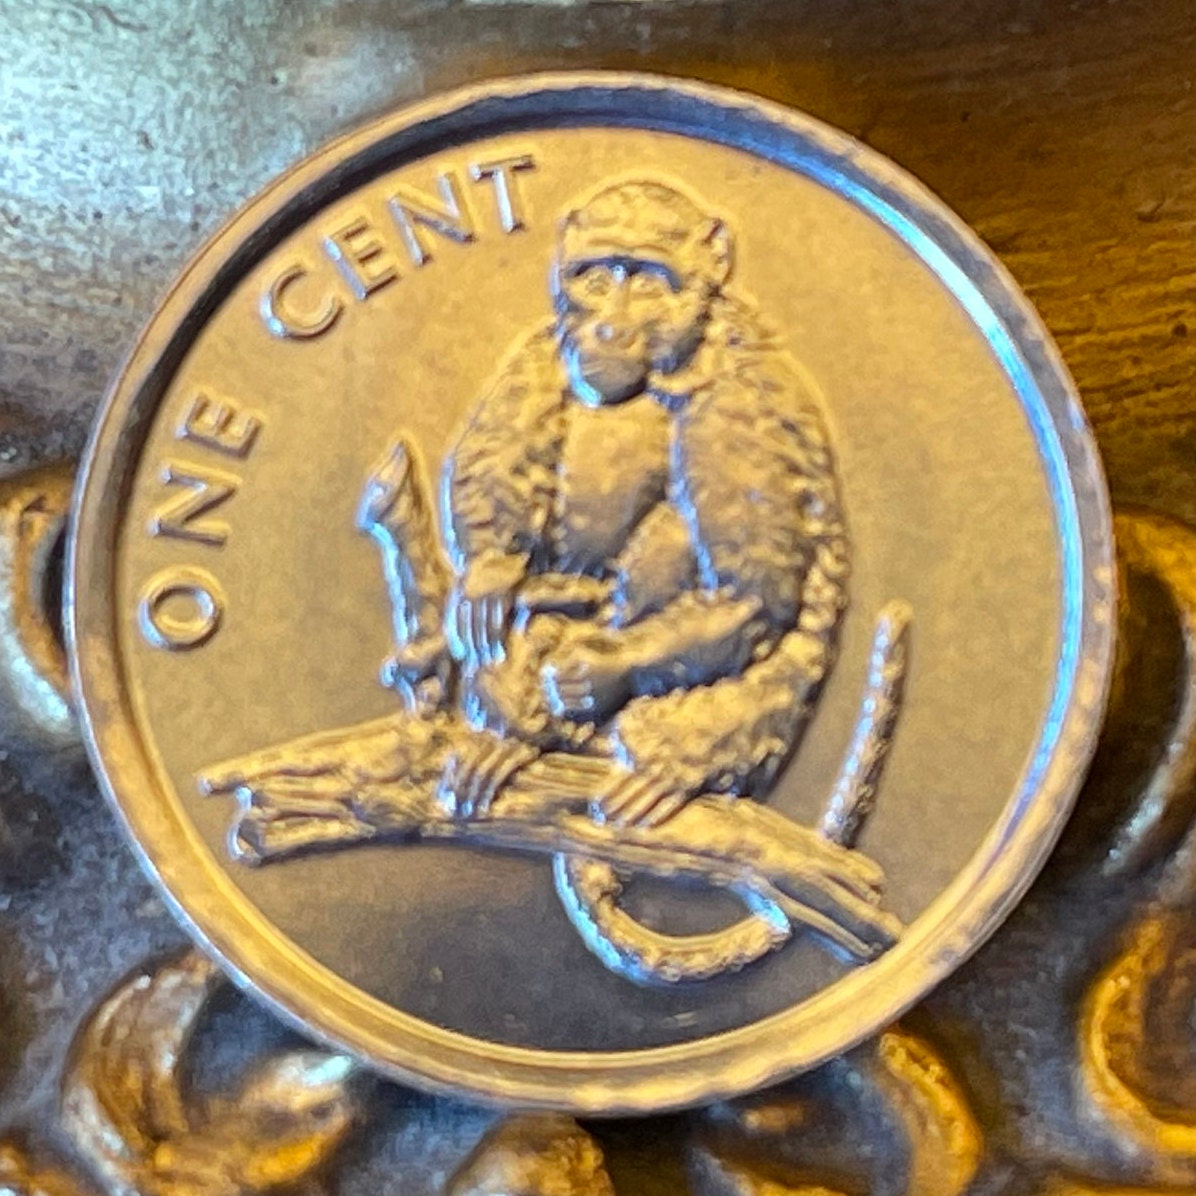 Rhesus Macaque 1 Cent Cook Islands Authentic Coin Money for Jewelry and Craft Making (Monkey)